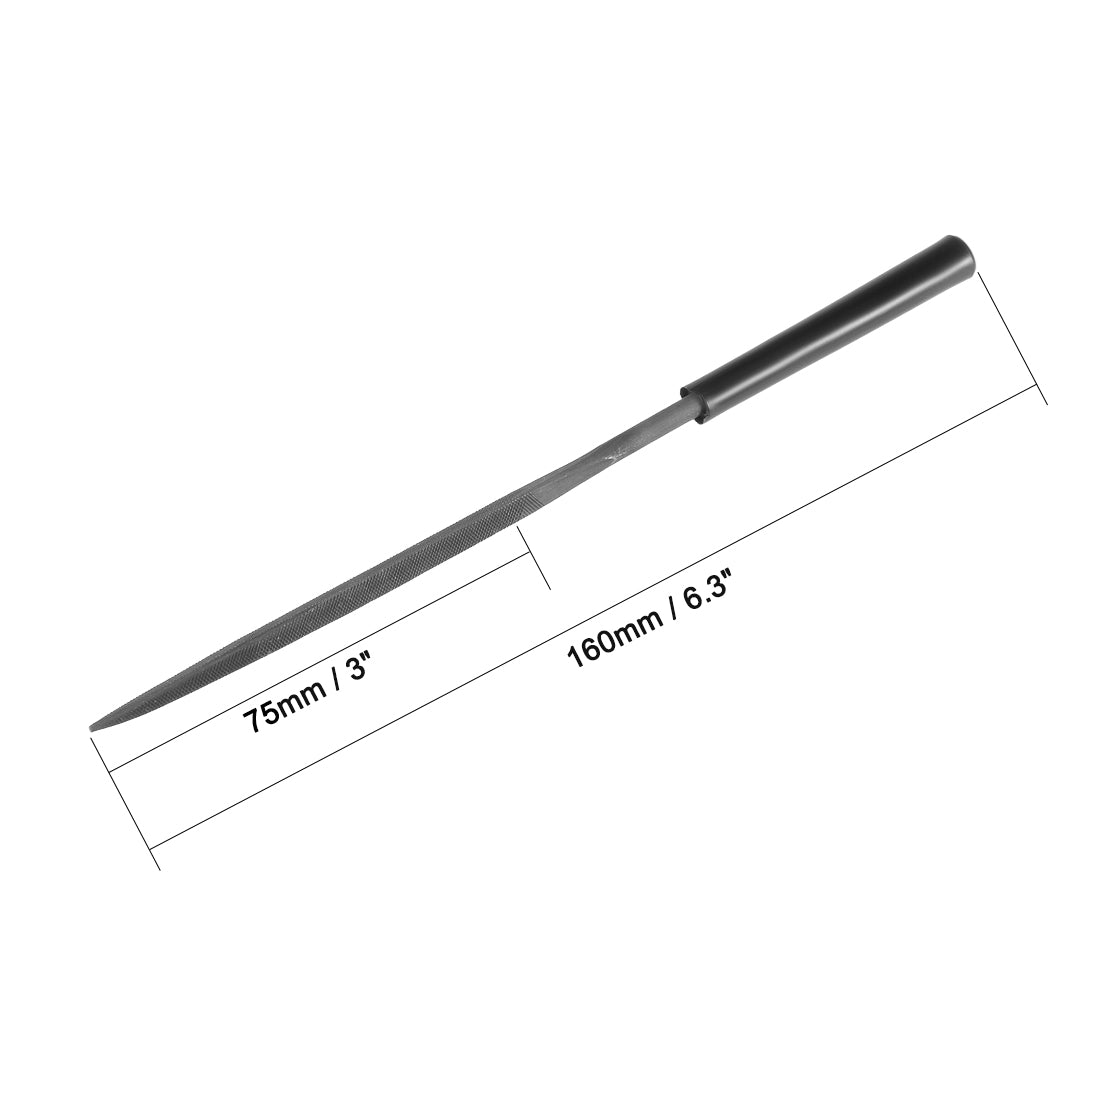 uxcell Uxcell Second Cut Steel Triangular Needle File with Plastic Handle, 4mm x 160mm